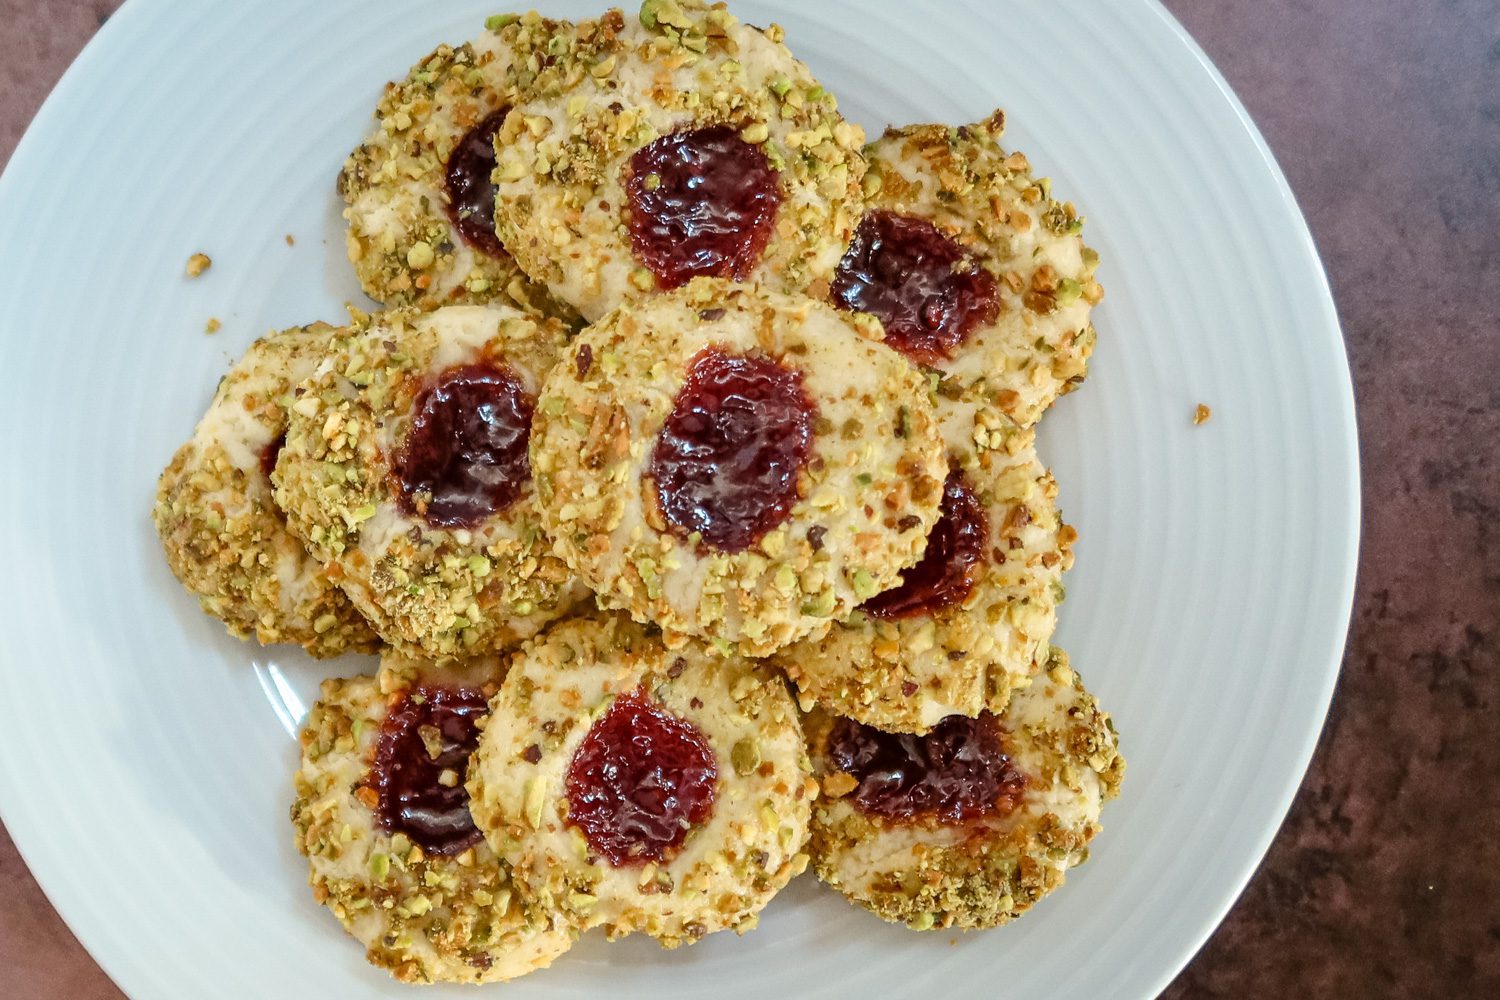 pistachio thumbprint cookies with jam center, arranged on a plate